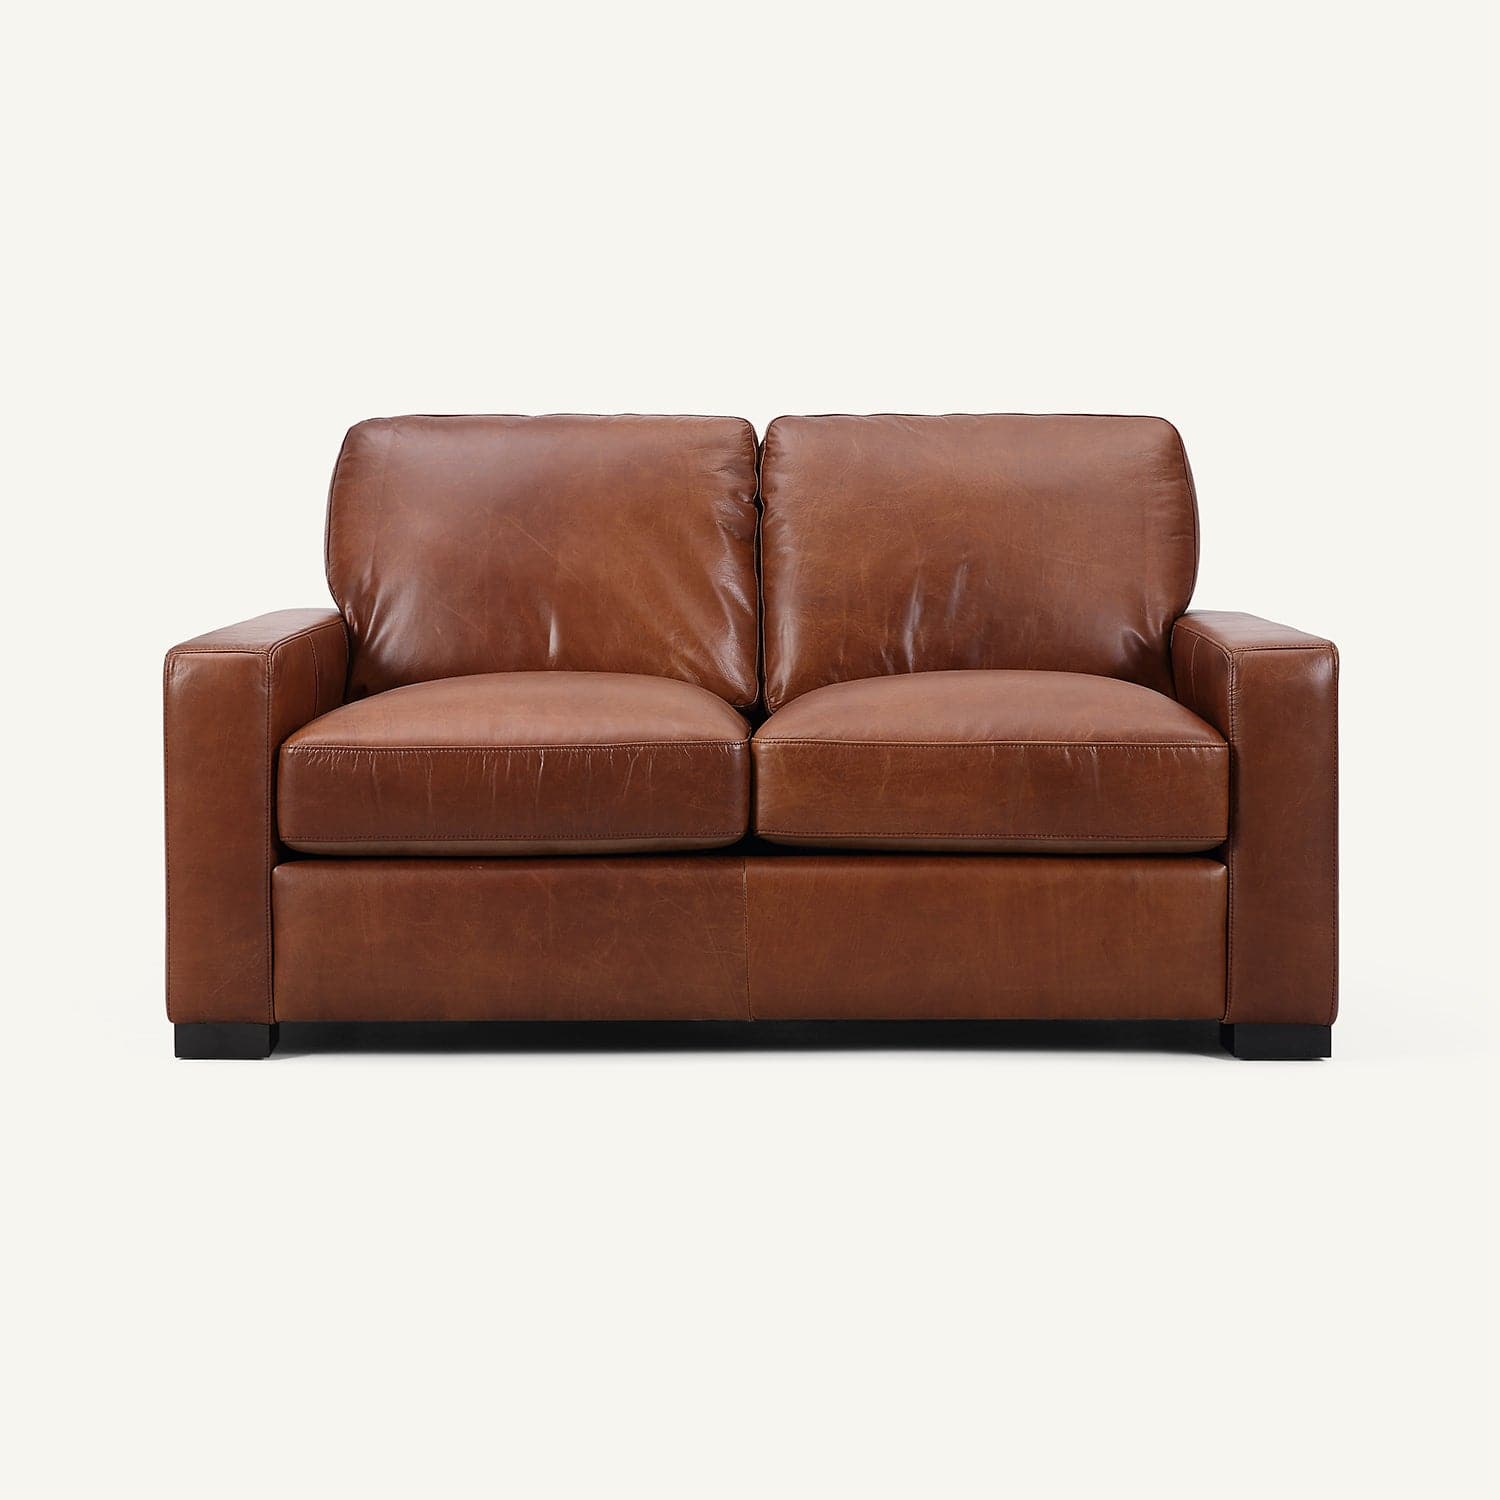 Randall Chestnut Brown Oil Wax Leather Loveseat with Ottoman